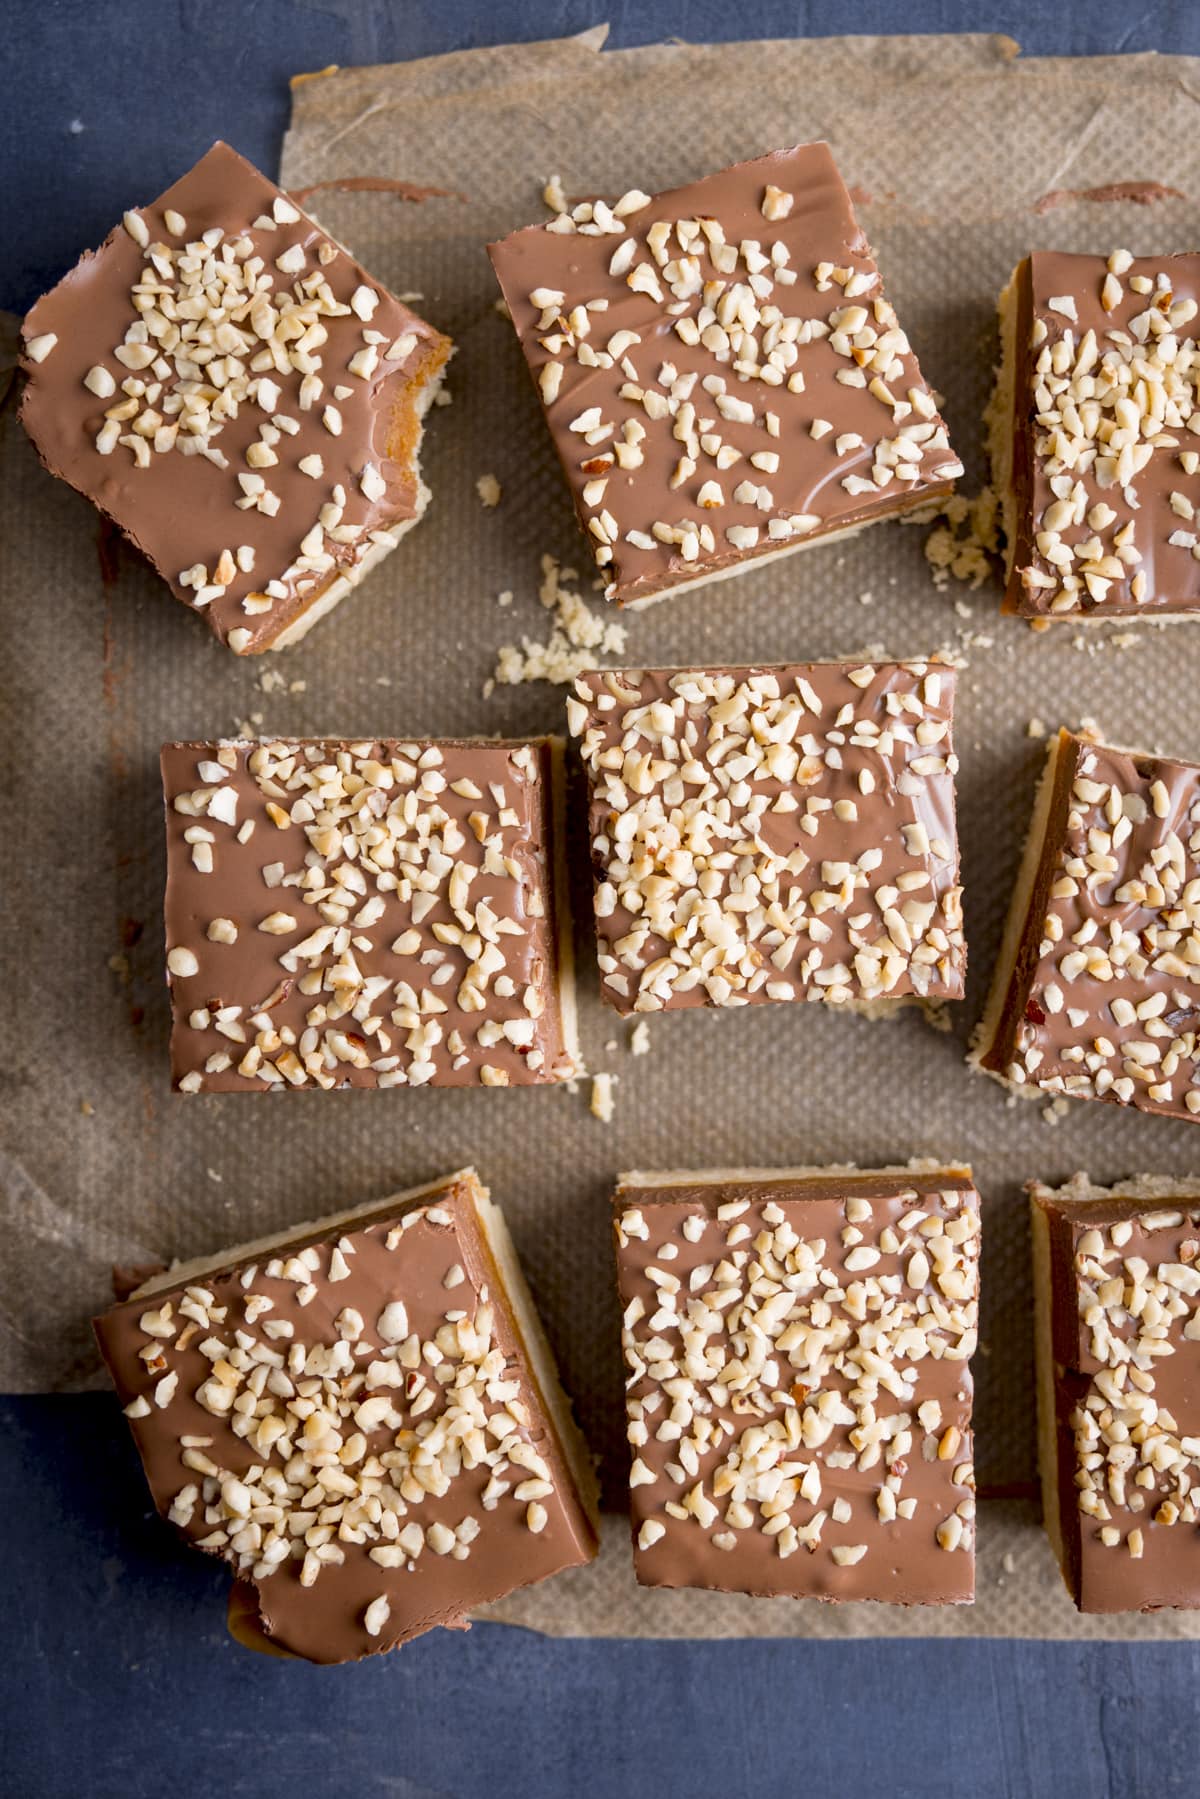 Overhead image of squares of millionaire's shortbread, top with chopped hazelnuts, on a piece of parchment paper. There is a bite taken out of one of the squares.